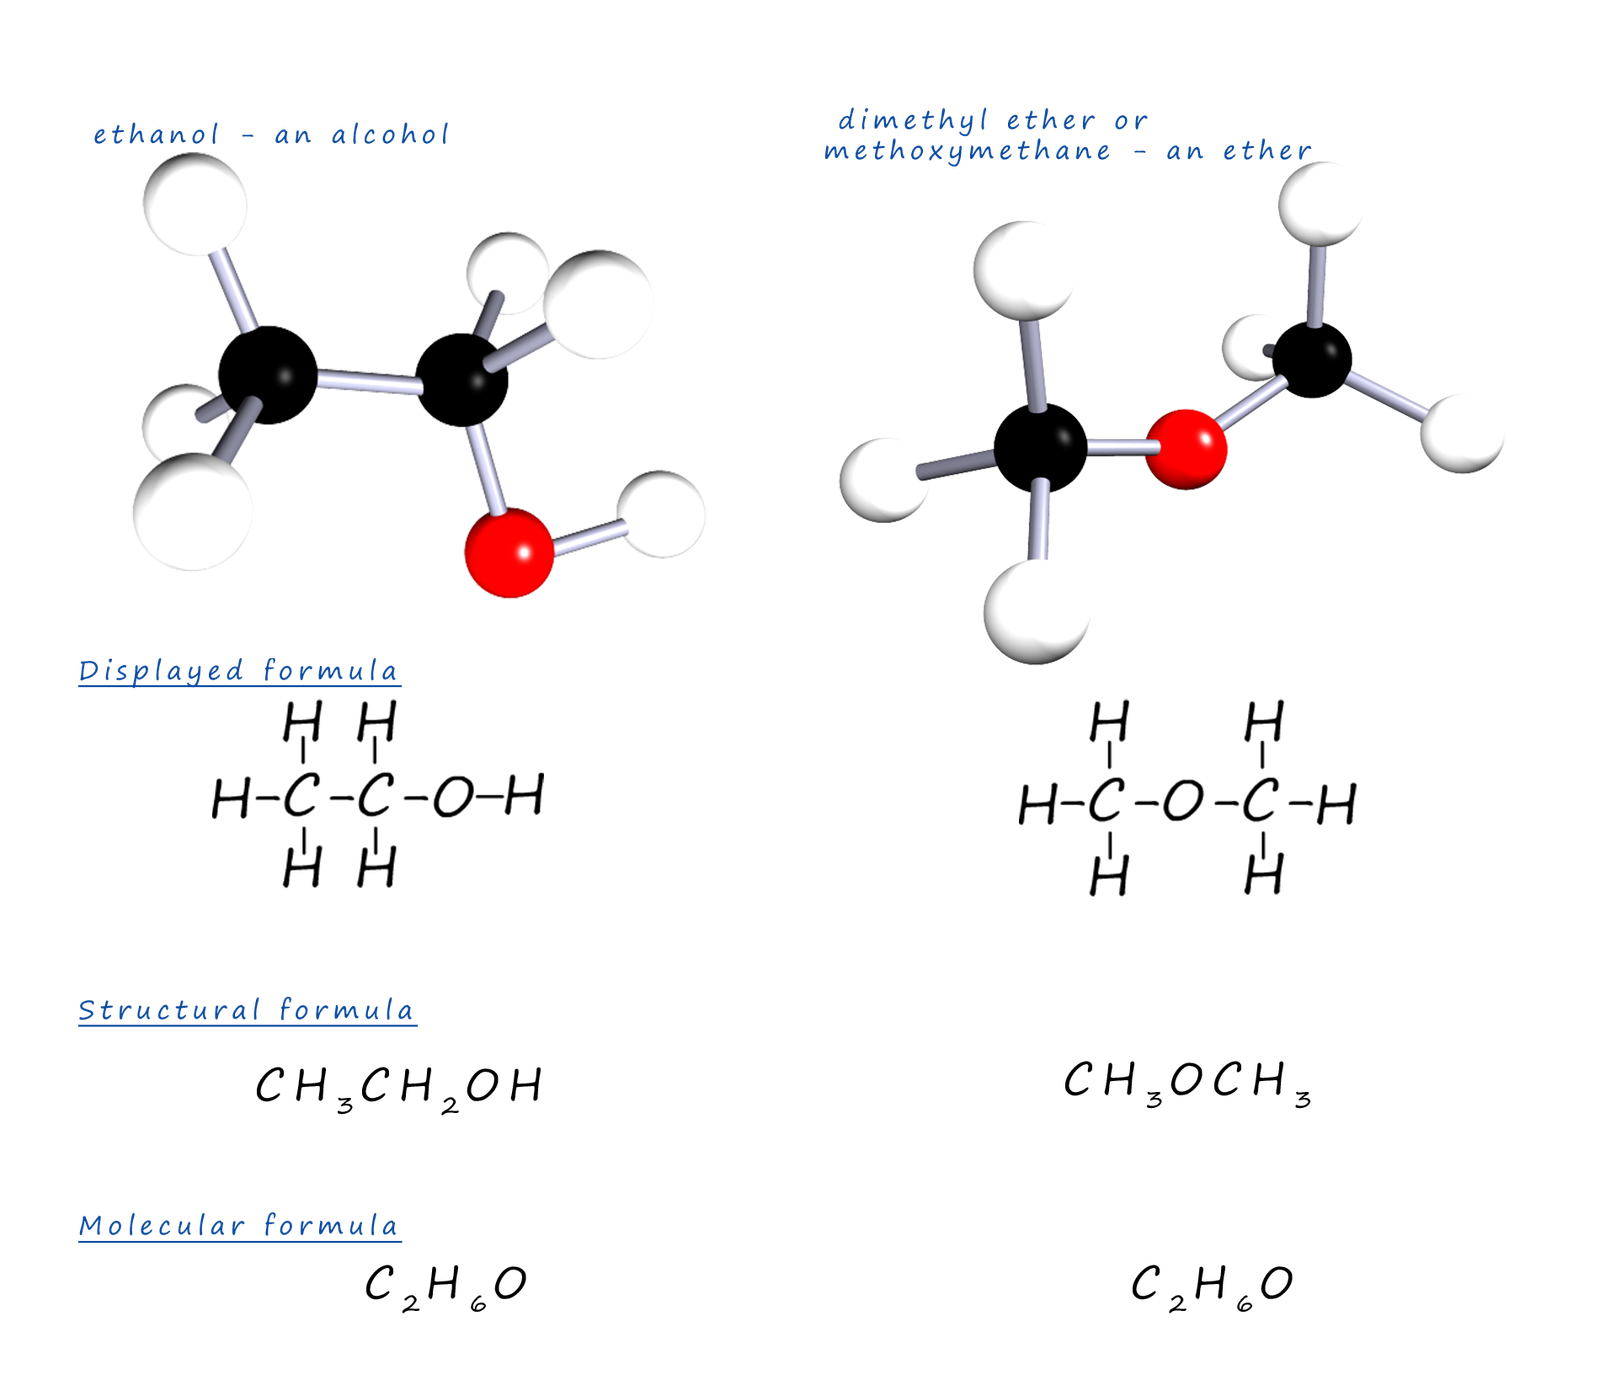 3d models, dispalyed formula showing examples of functional group isomers.